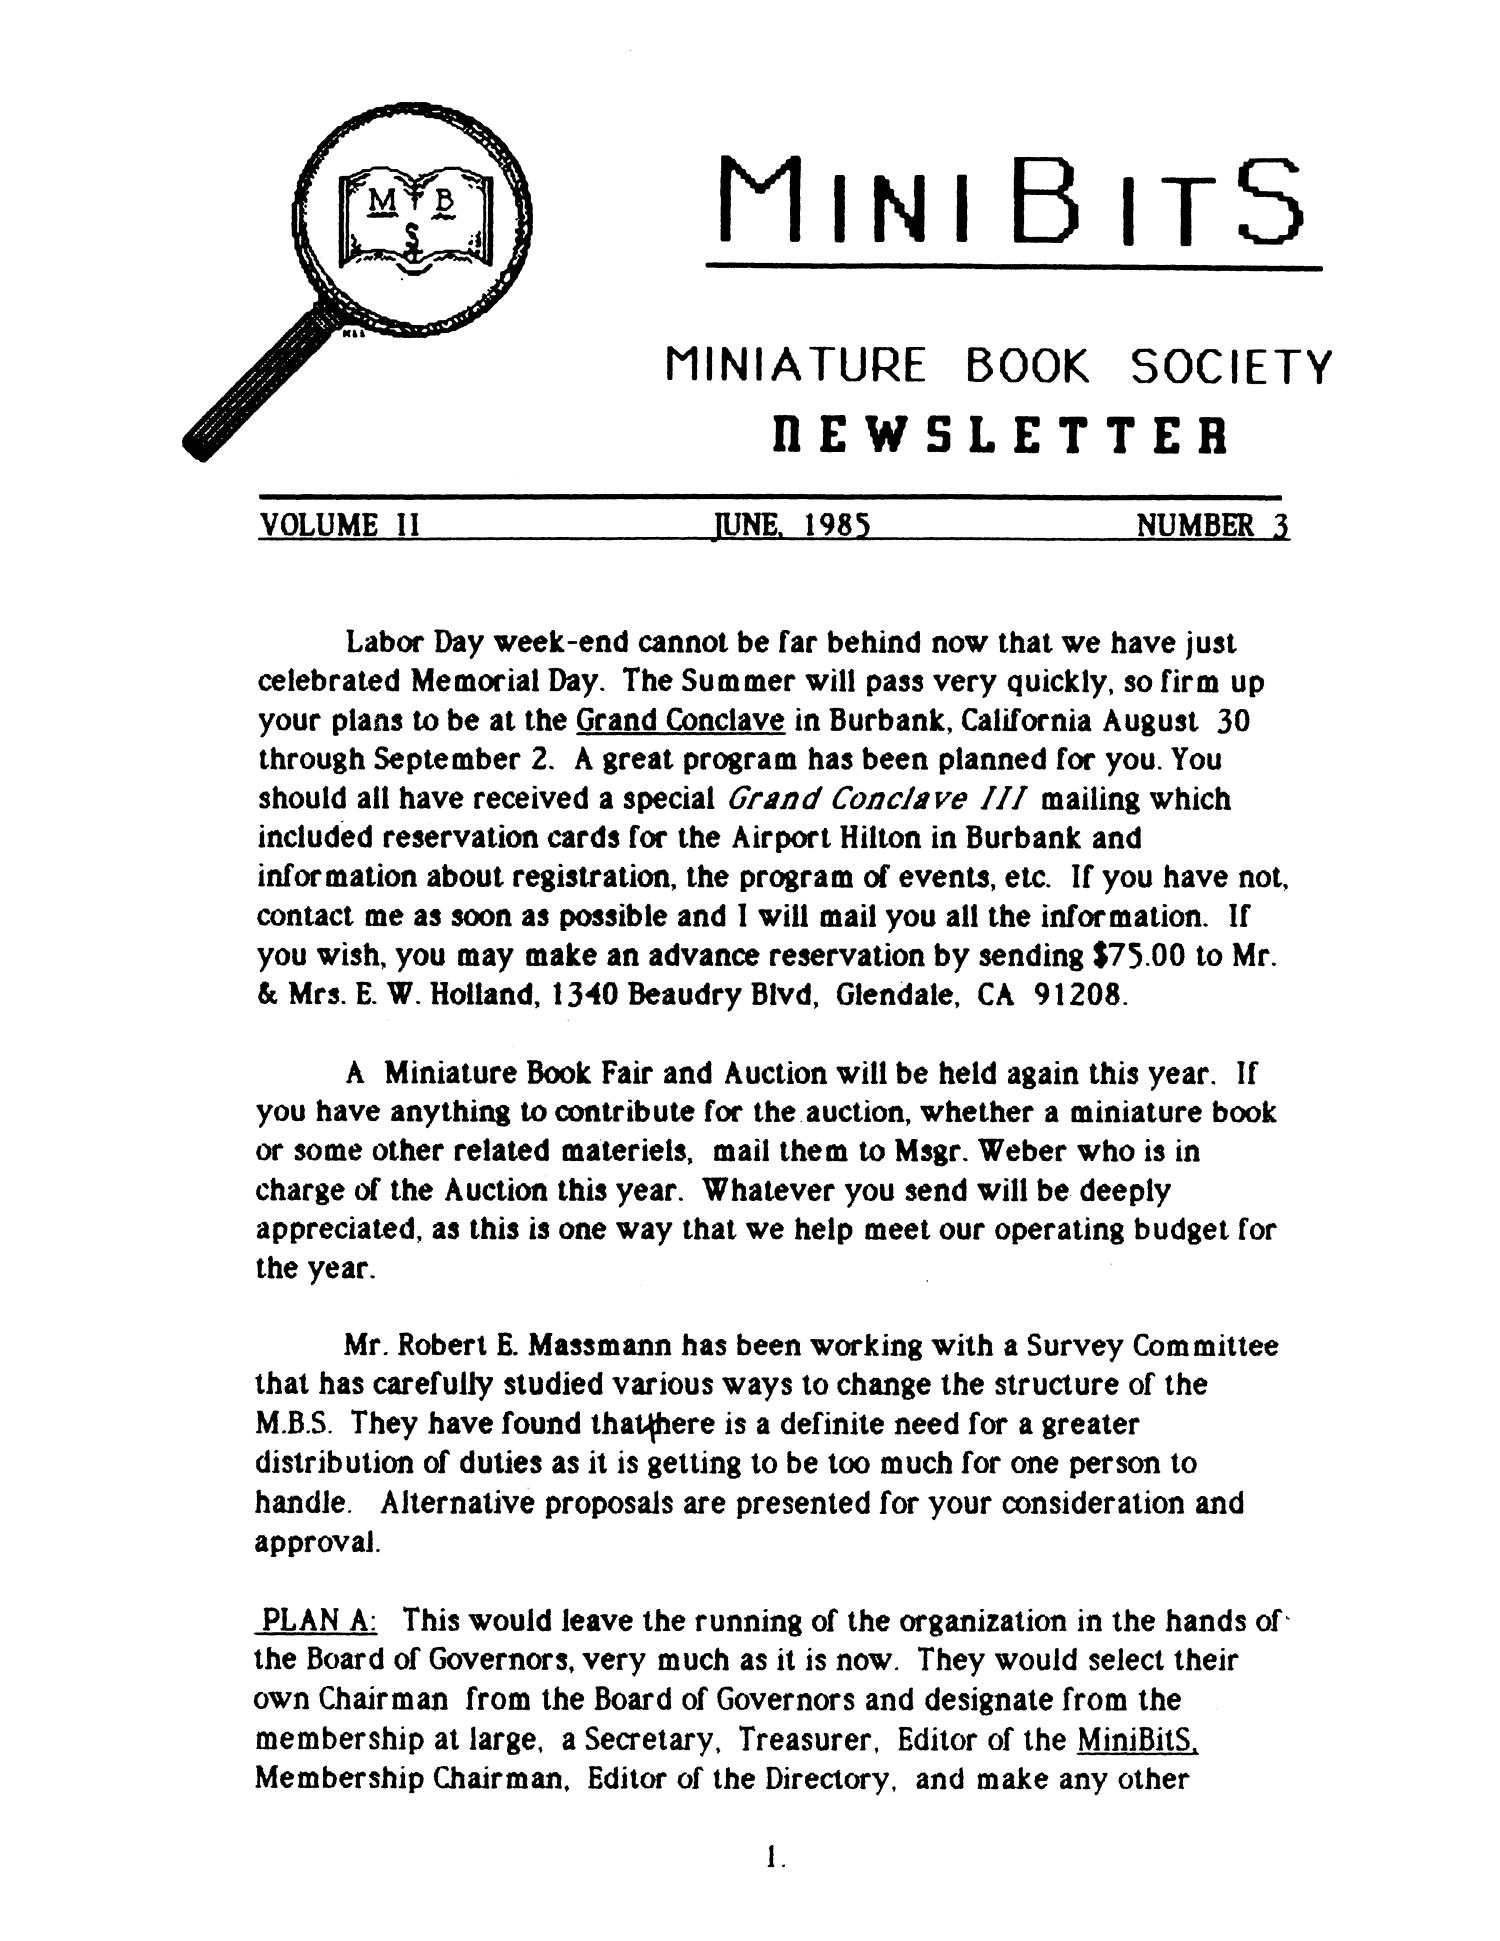 MiniBits: Miniature Book Society Newsletter, Volume 2, Number 3, June 1985
                                                
                                                    1
                                                